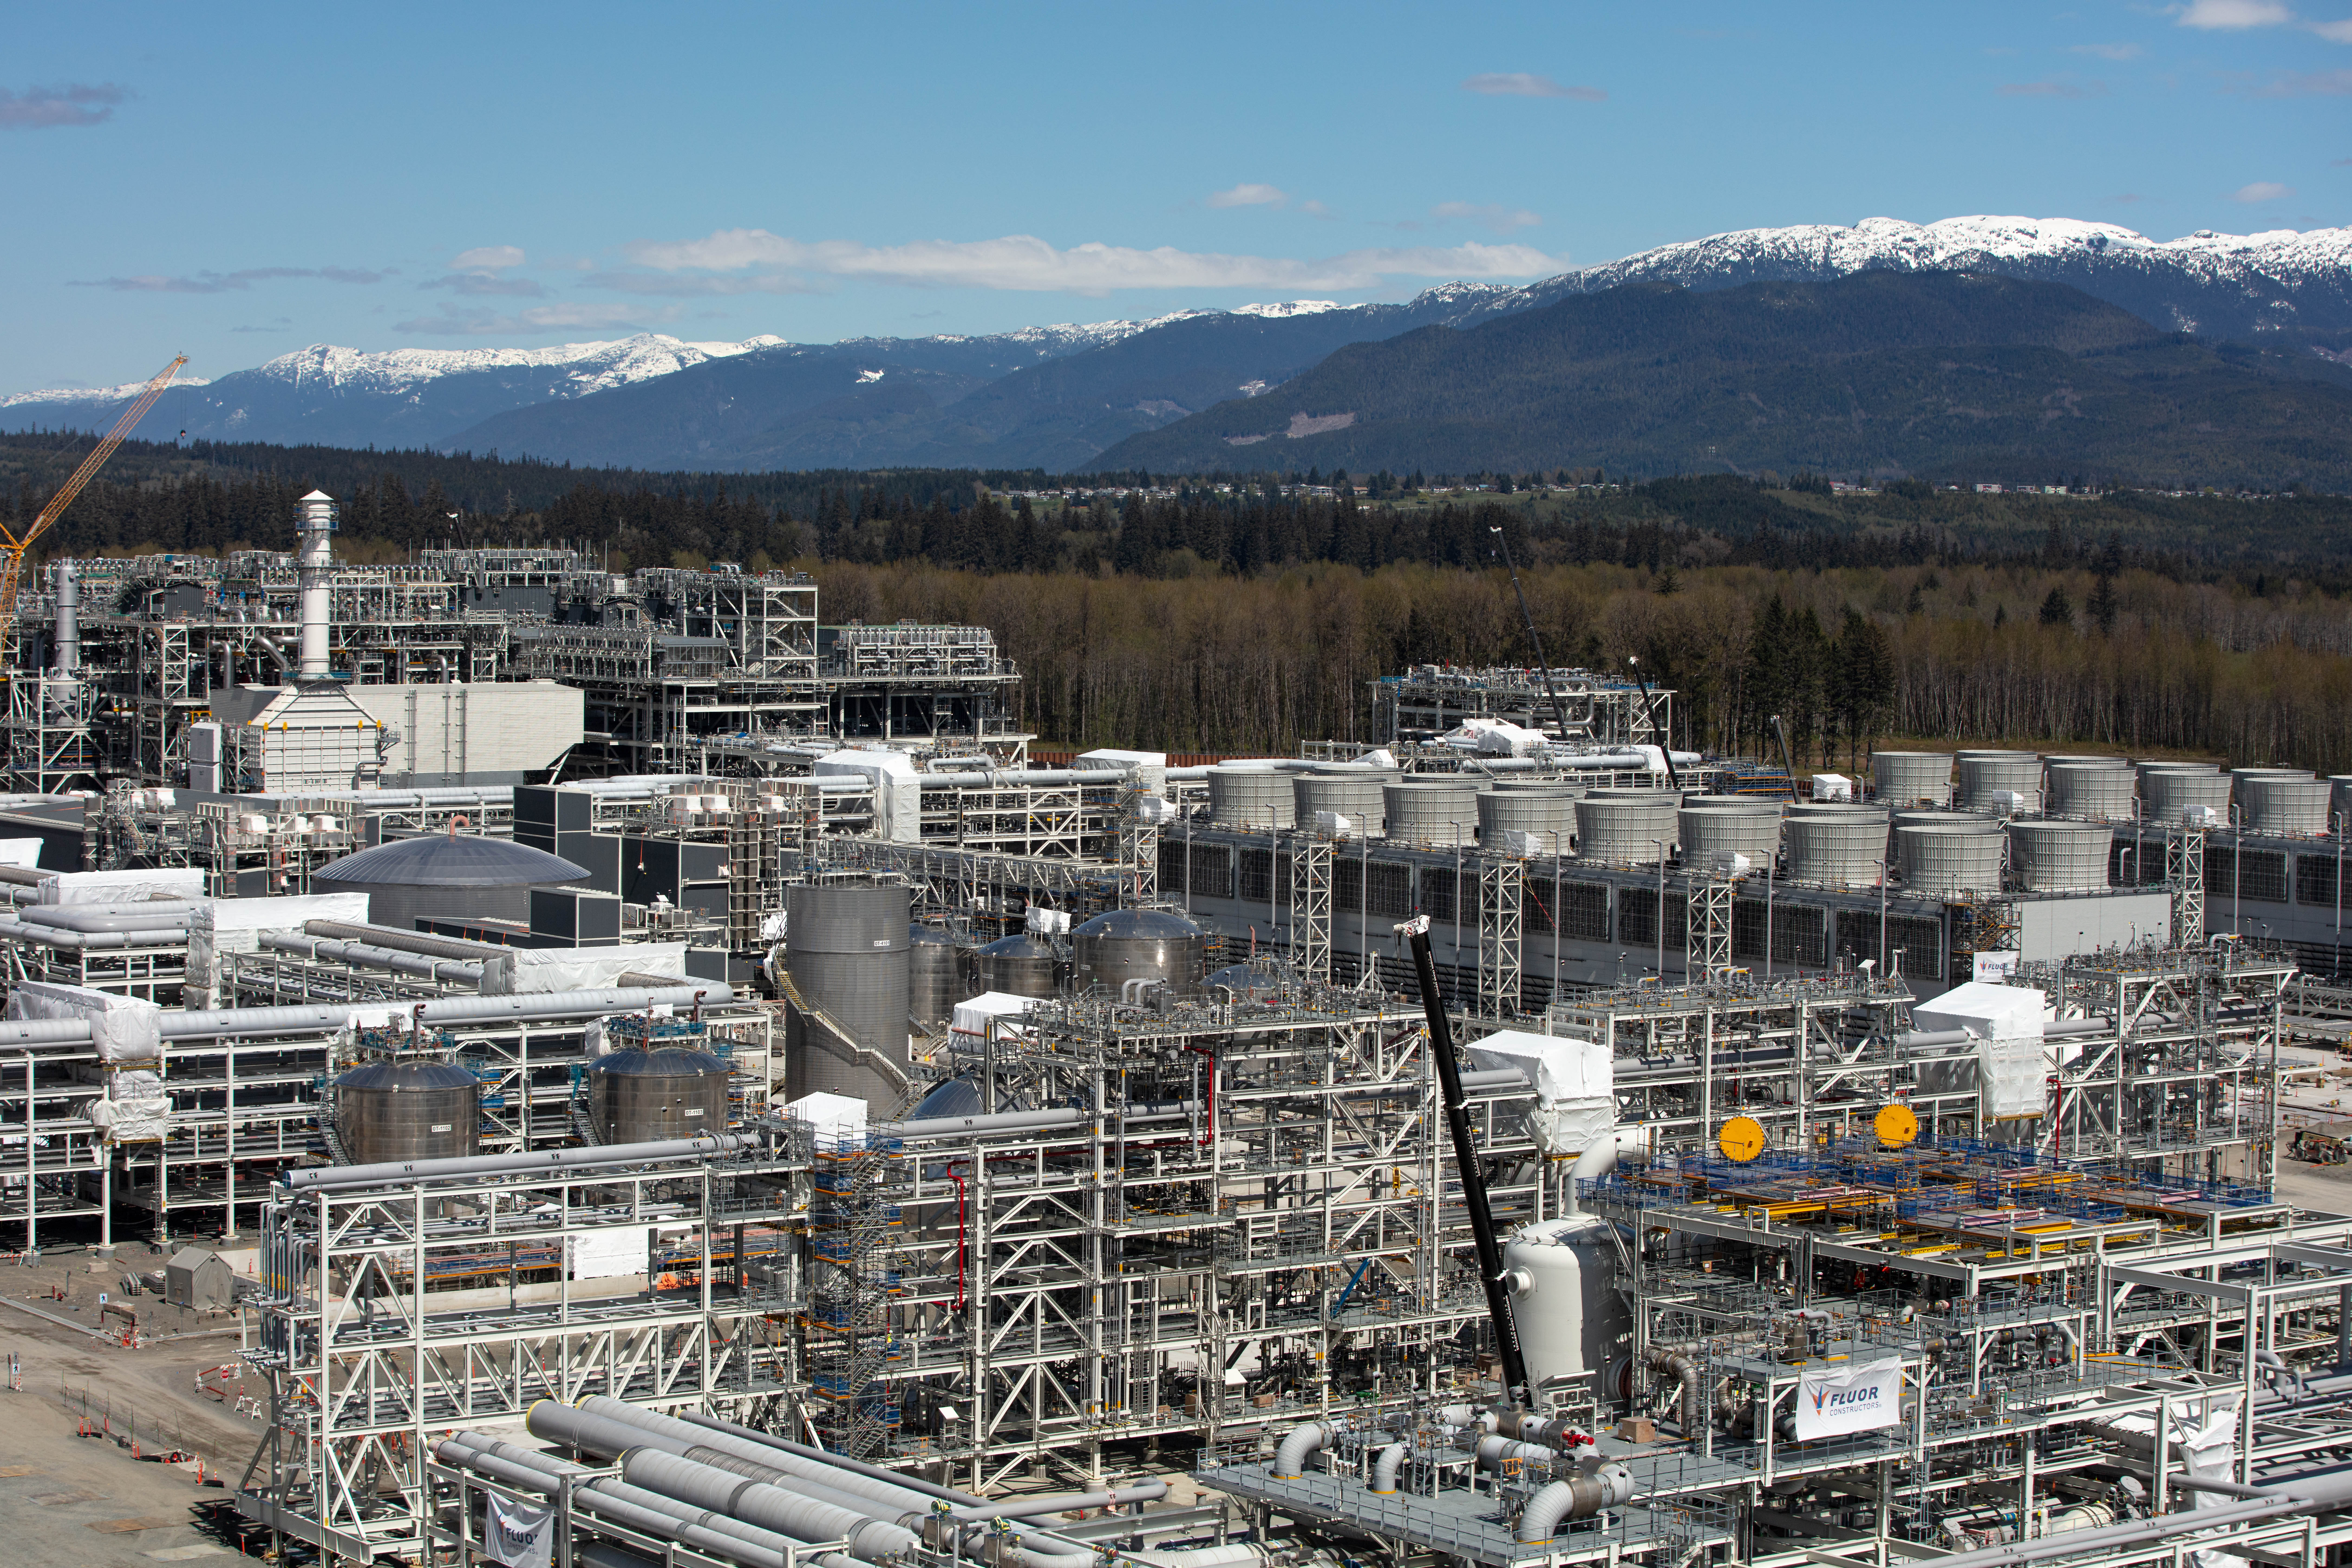 Liquefied natural gas pipelines and equipment at the LNG Canada site, showcasing infrastructure and operations